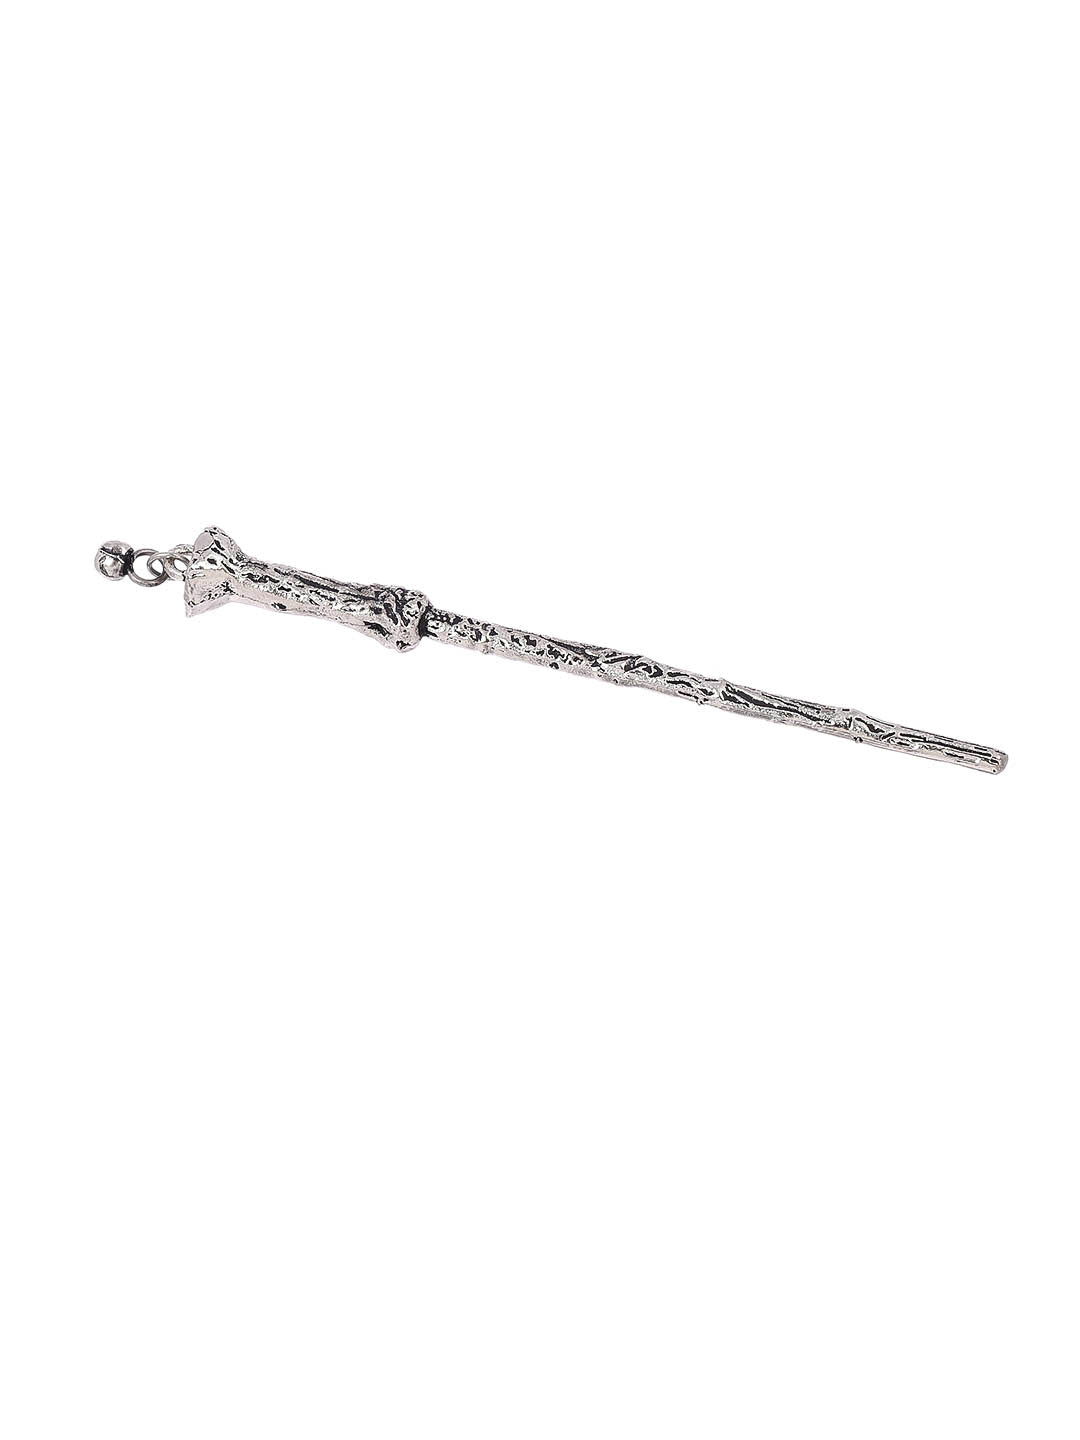 Silver Toned Embellished Hairstick Accessory